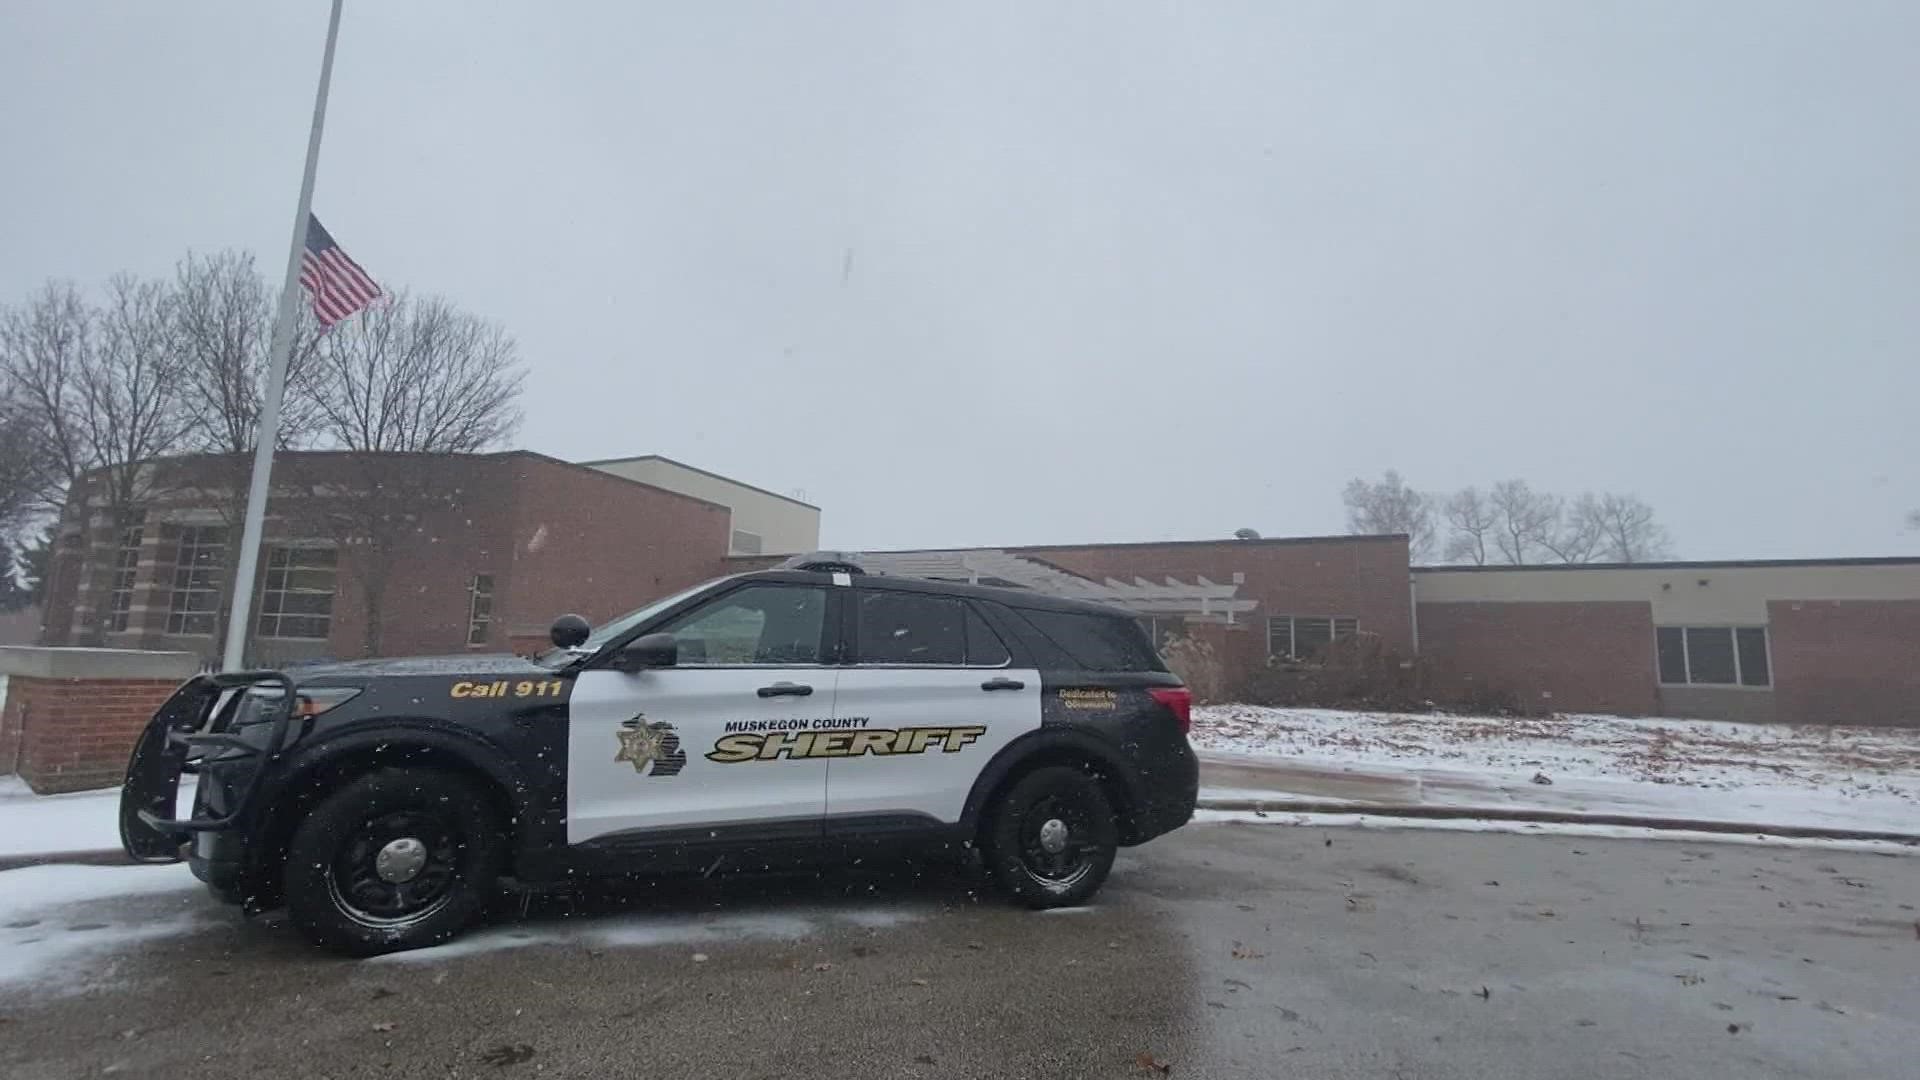 Sunday night, Oakridge Superintendent Tom Livezey said they were notified about two potentially threatening Snapchat posts, but still did not cancel school.